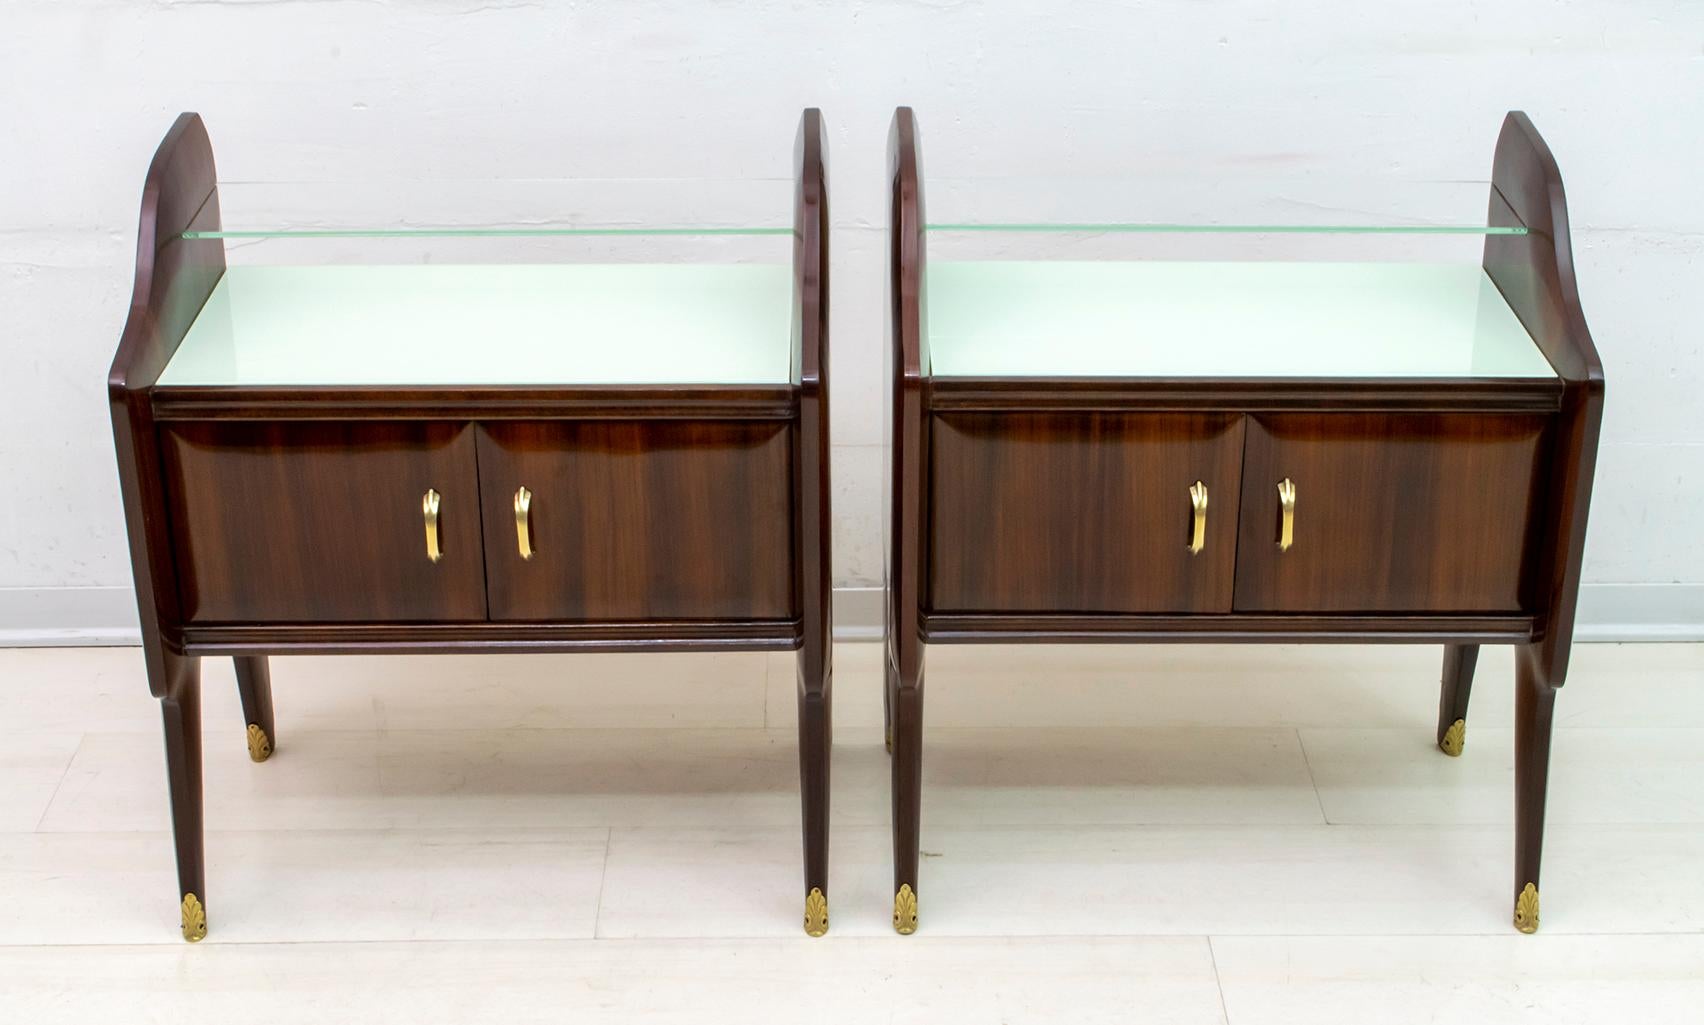 Pair of bedside tables designed by the famous architect Ico Parisi, in walnut wood, glass shelves and brass finishes. They have been completely restored, as can be seen in the photo.